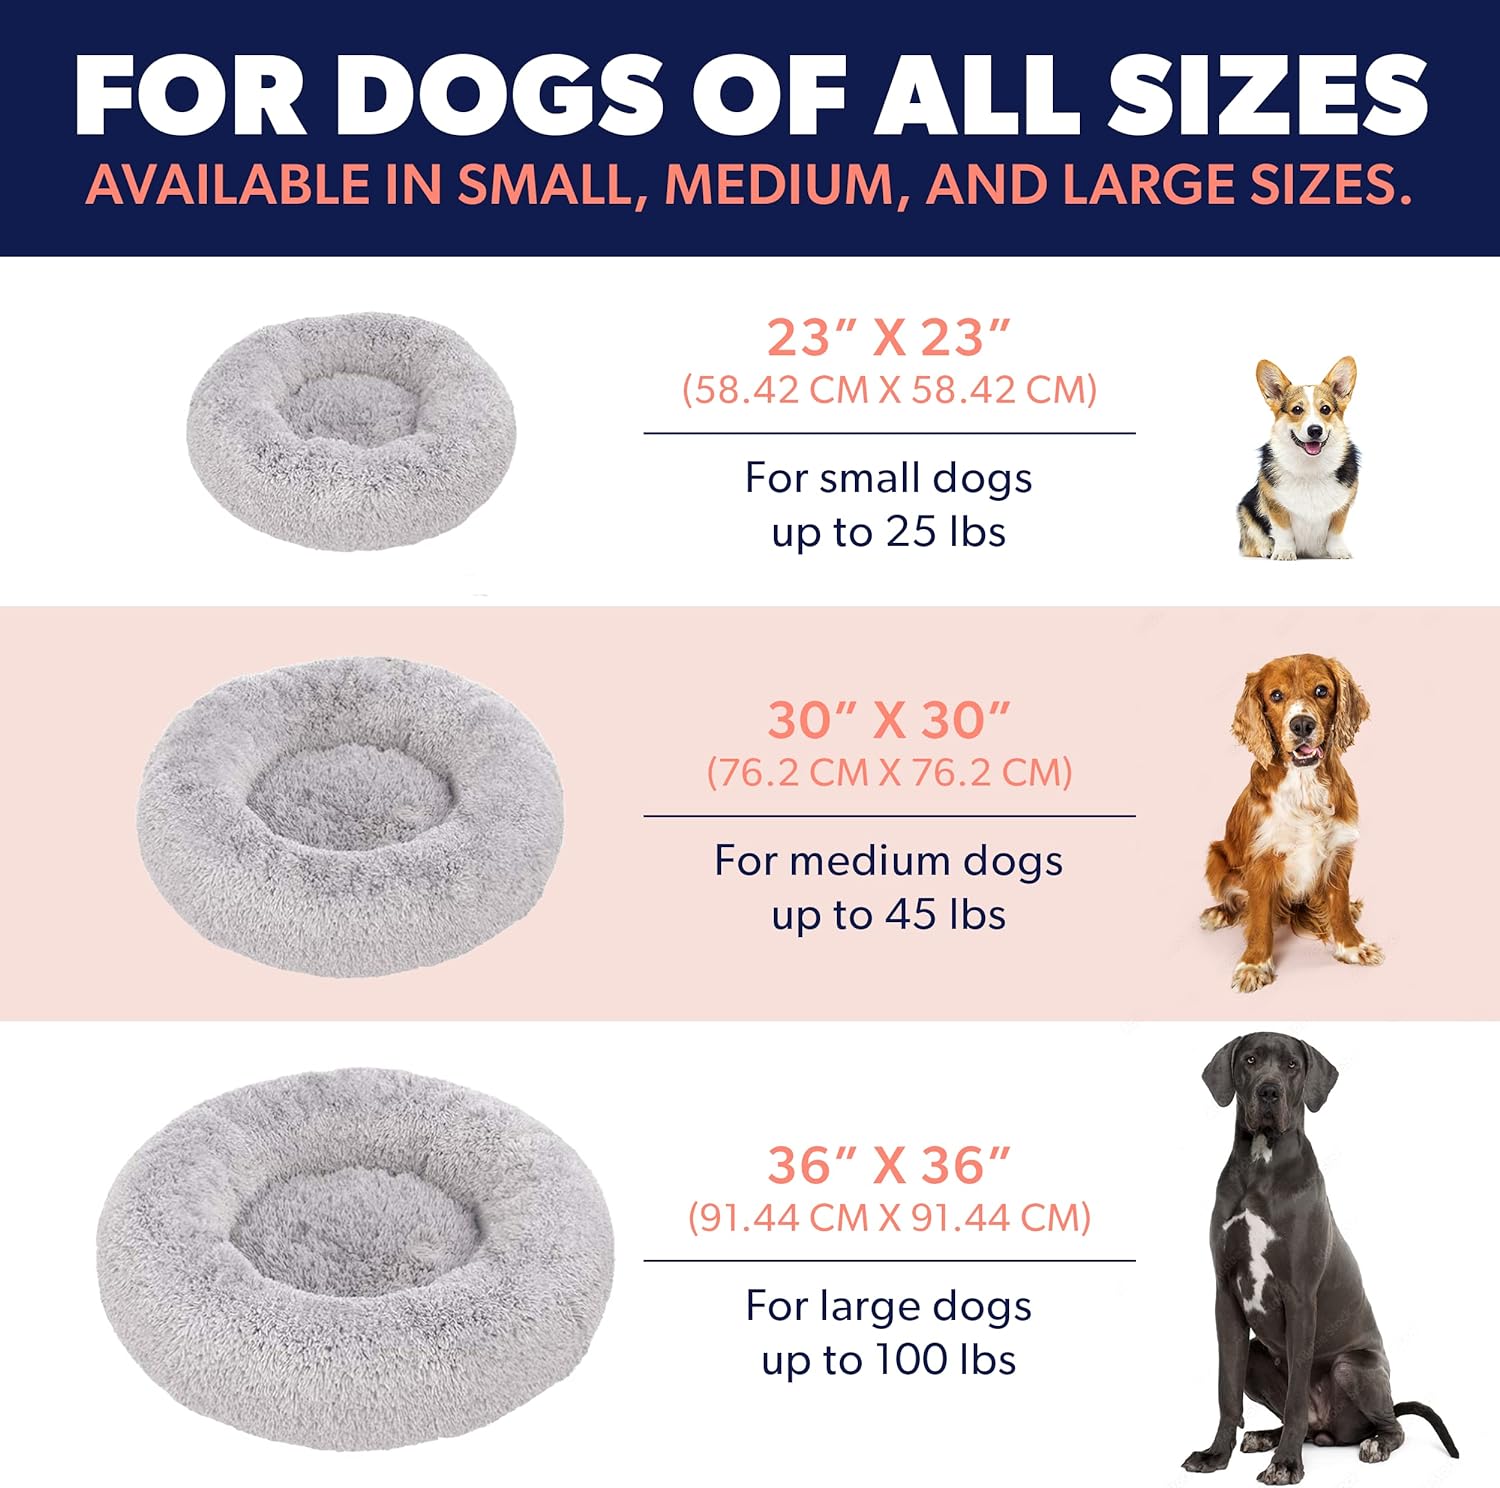 Active Pets Plush Calming Donut Dog Bed - Anti Anxiety Bed for Dogs, Soft Fuzzy Comfort - for Small Dogs and Cats, Fits up to 25lbs, 23 x 23 (Small, Dark Grey)